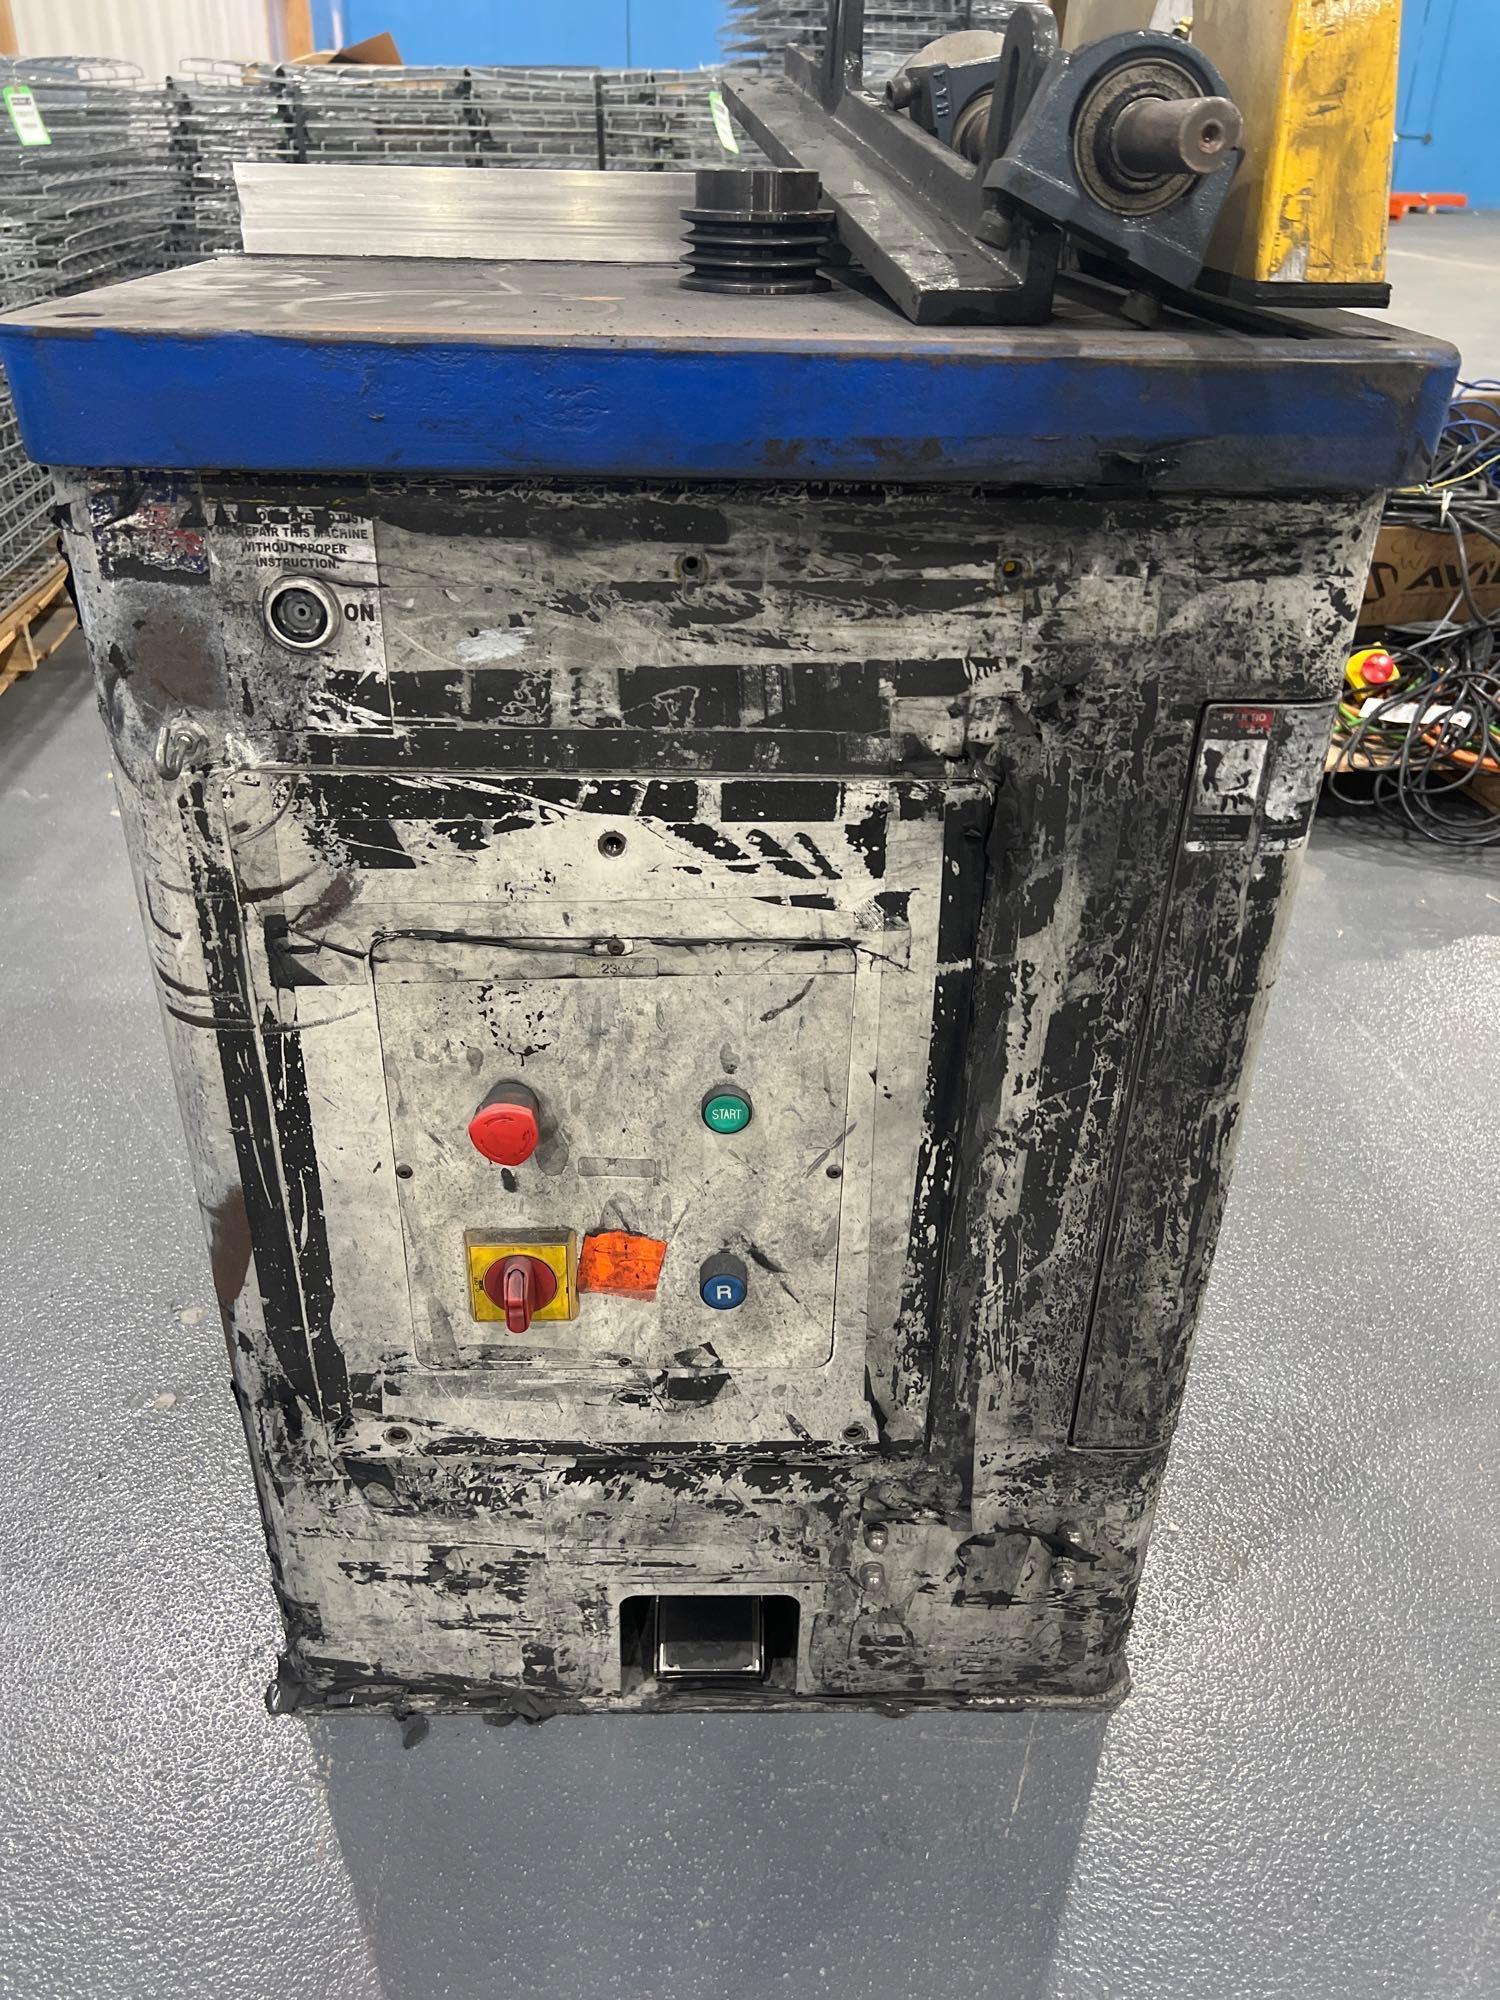 CTD MACHINE, RAN WHEN PULLED FROM SERVICE, UNTESTED